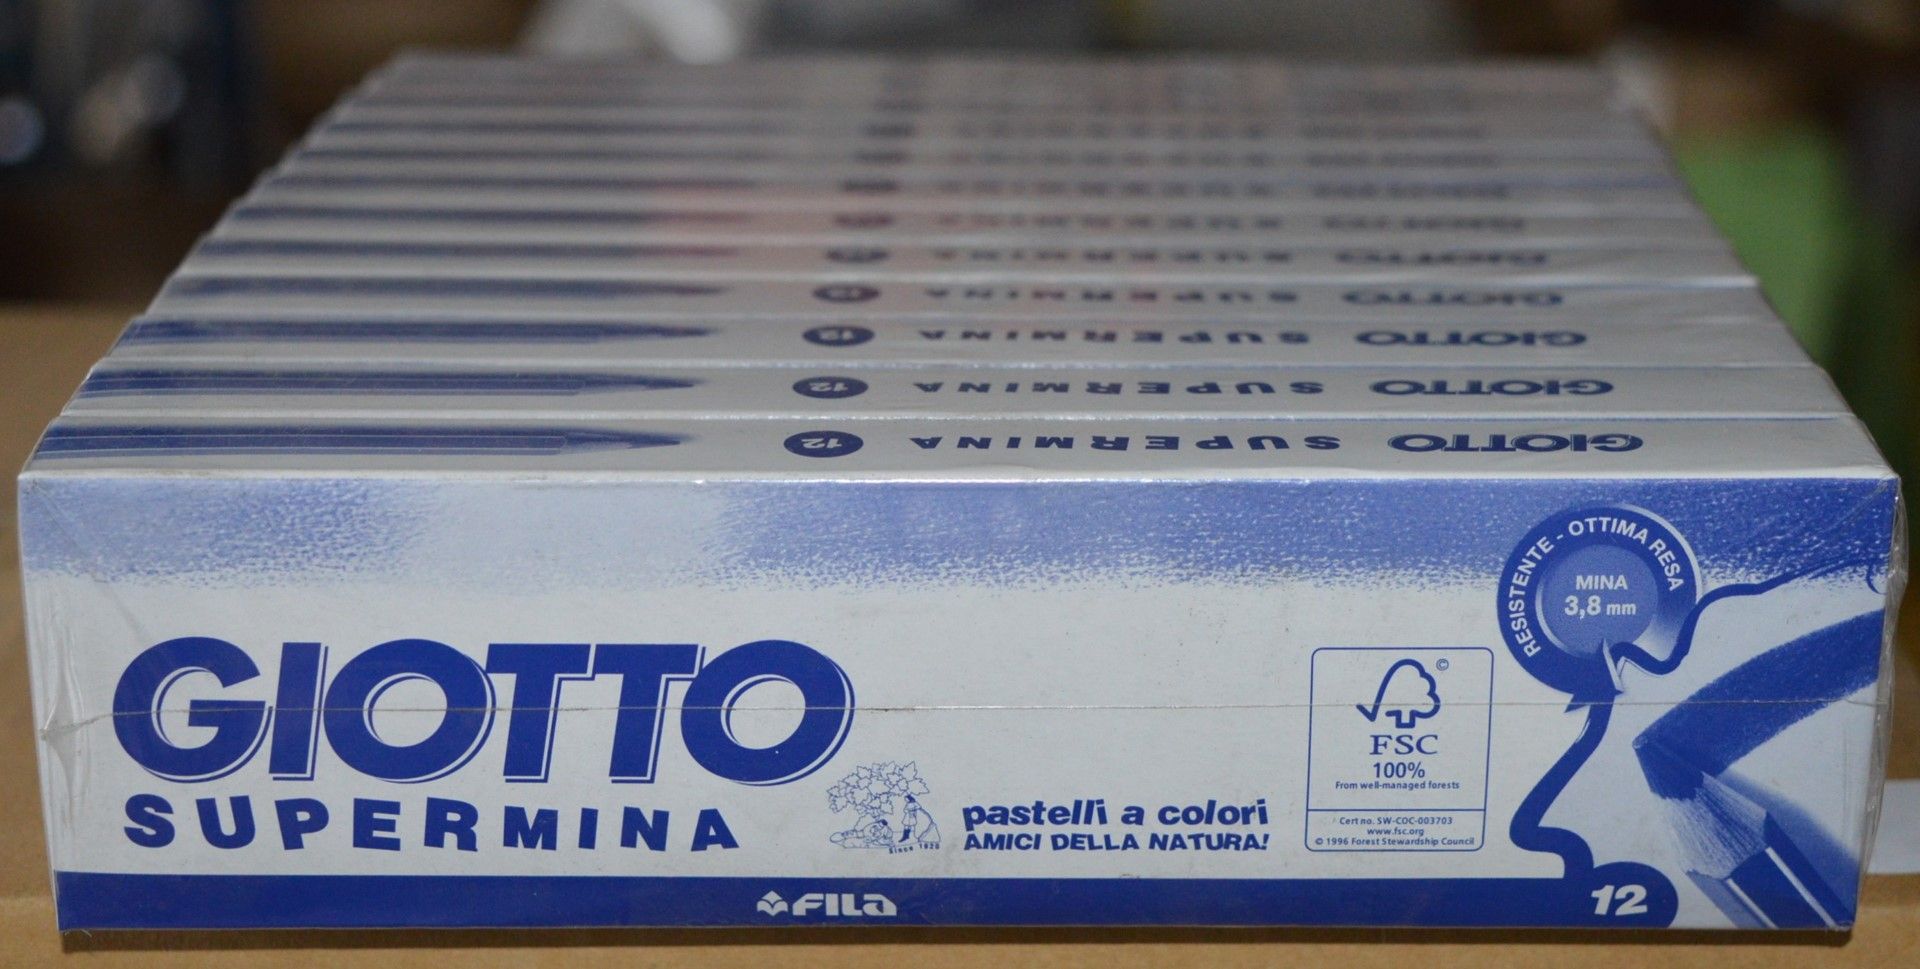 36 x Packs of Giotto Supermina 3.8mm Blue Pencils - High Quality Pencils Packed in Boxes of 12 -